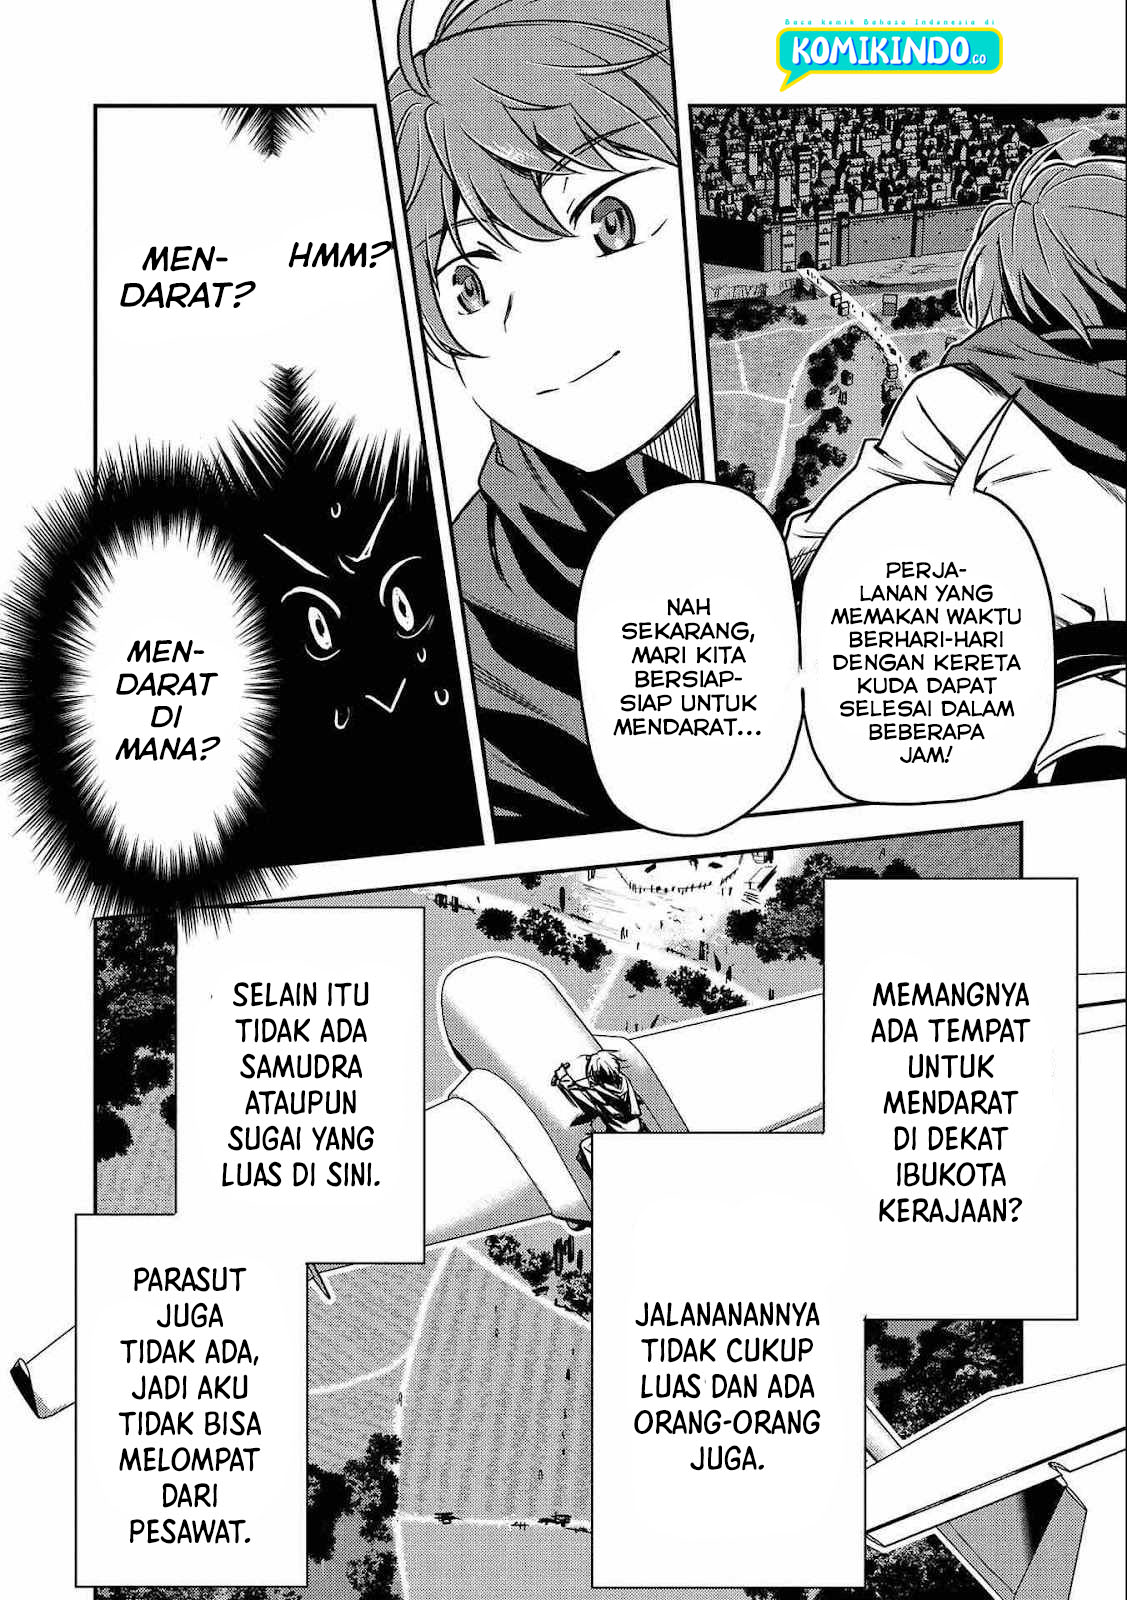 Villager A Wants to Save the Villainess no Matter What! Chapter 07